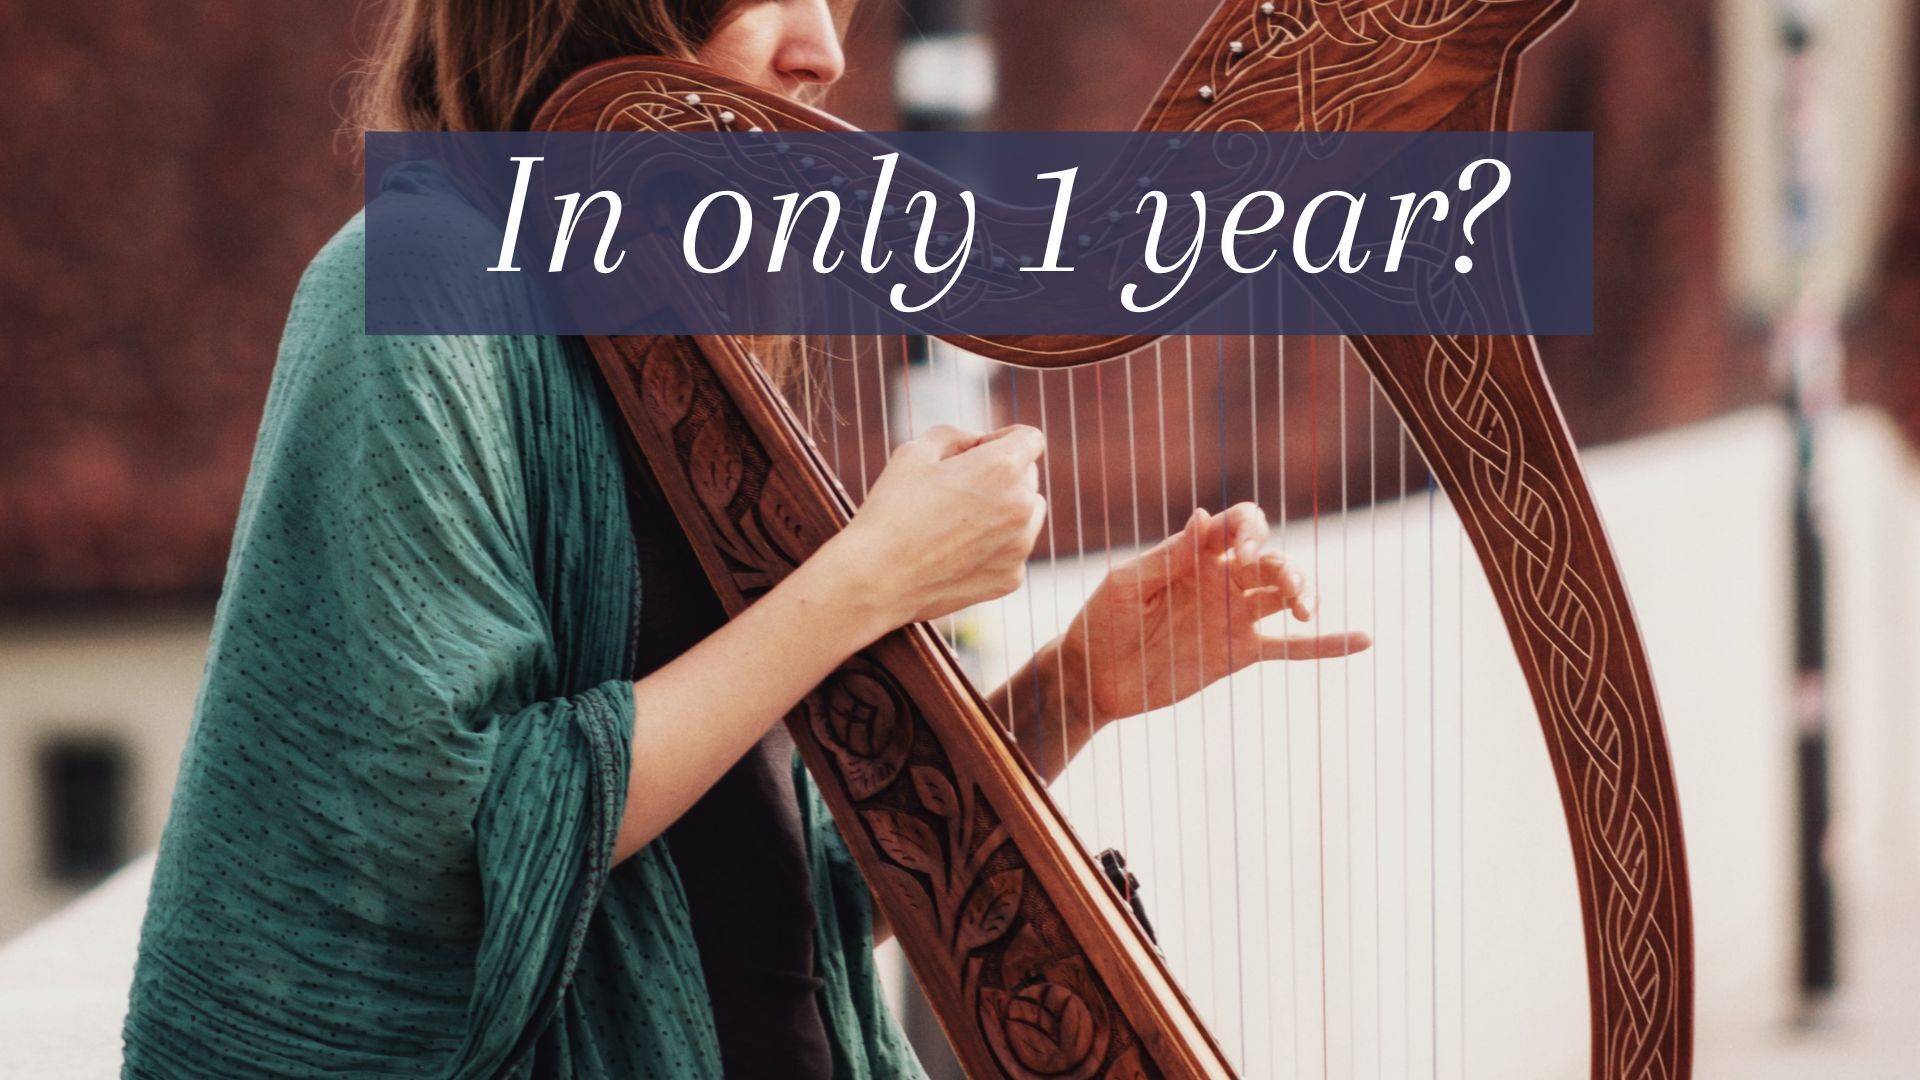 How long does it take to learn the harp?